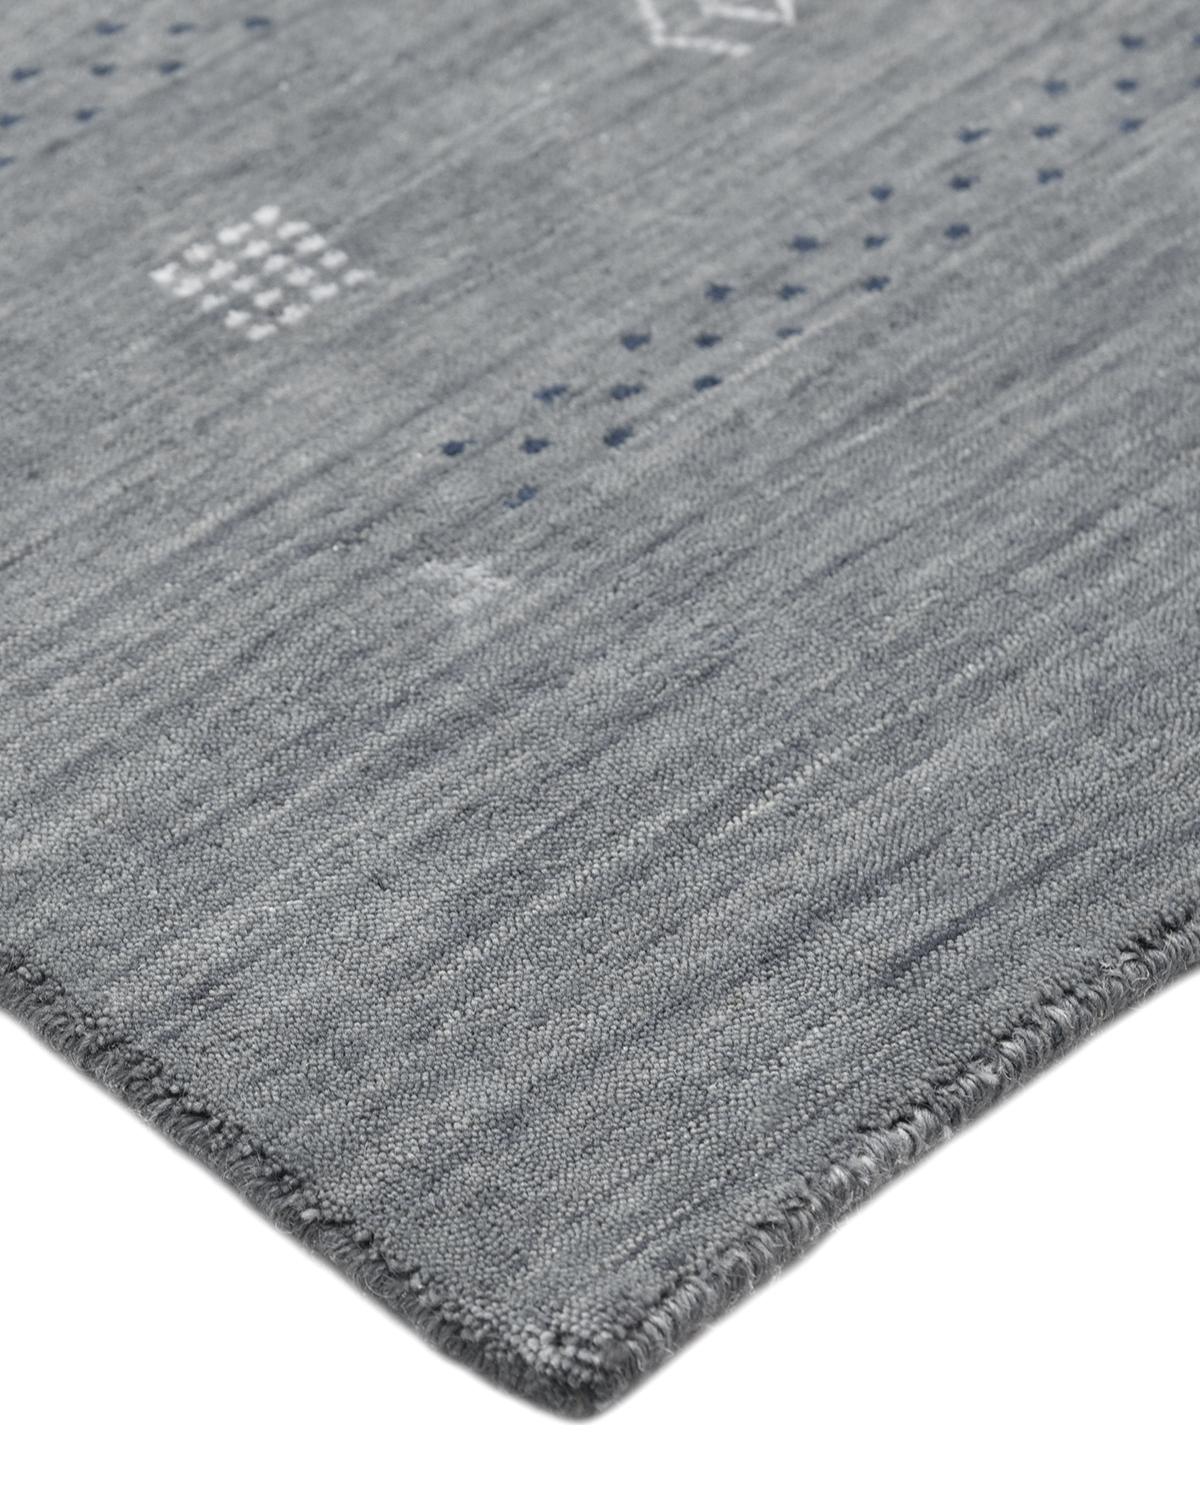 The Gabbeh Inspired Collection, made in India, boasts a sumptuous pile that will pamper your bare feet, making these rugs especially welcome in bedrooms. Subtle color variations among the seemingly simple geometric motifs add to the bohemian allure.